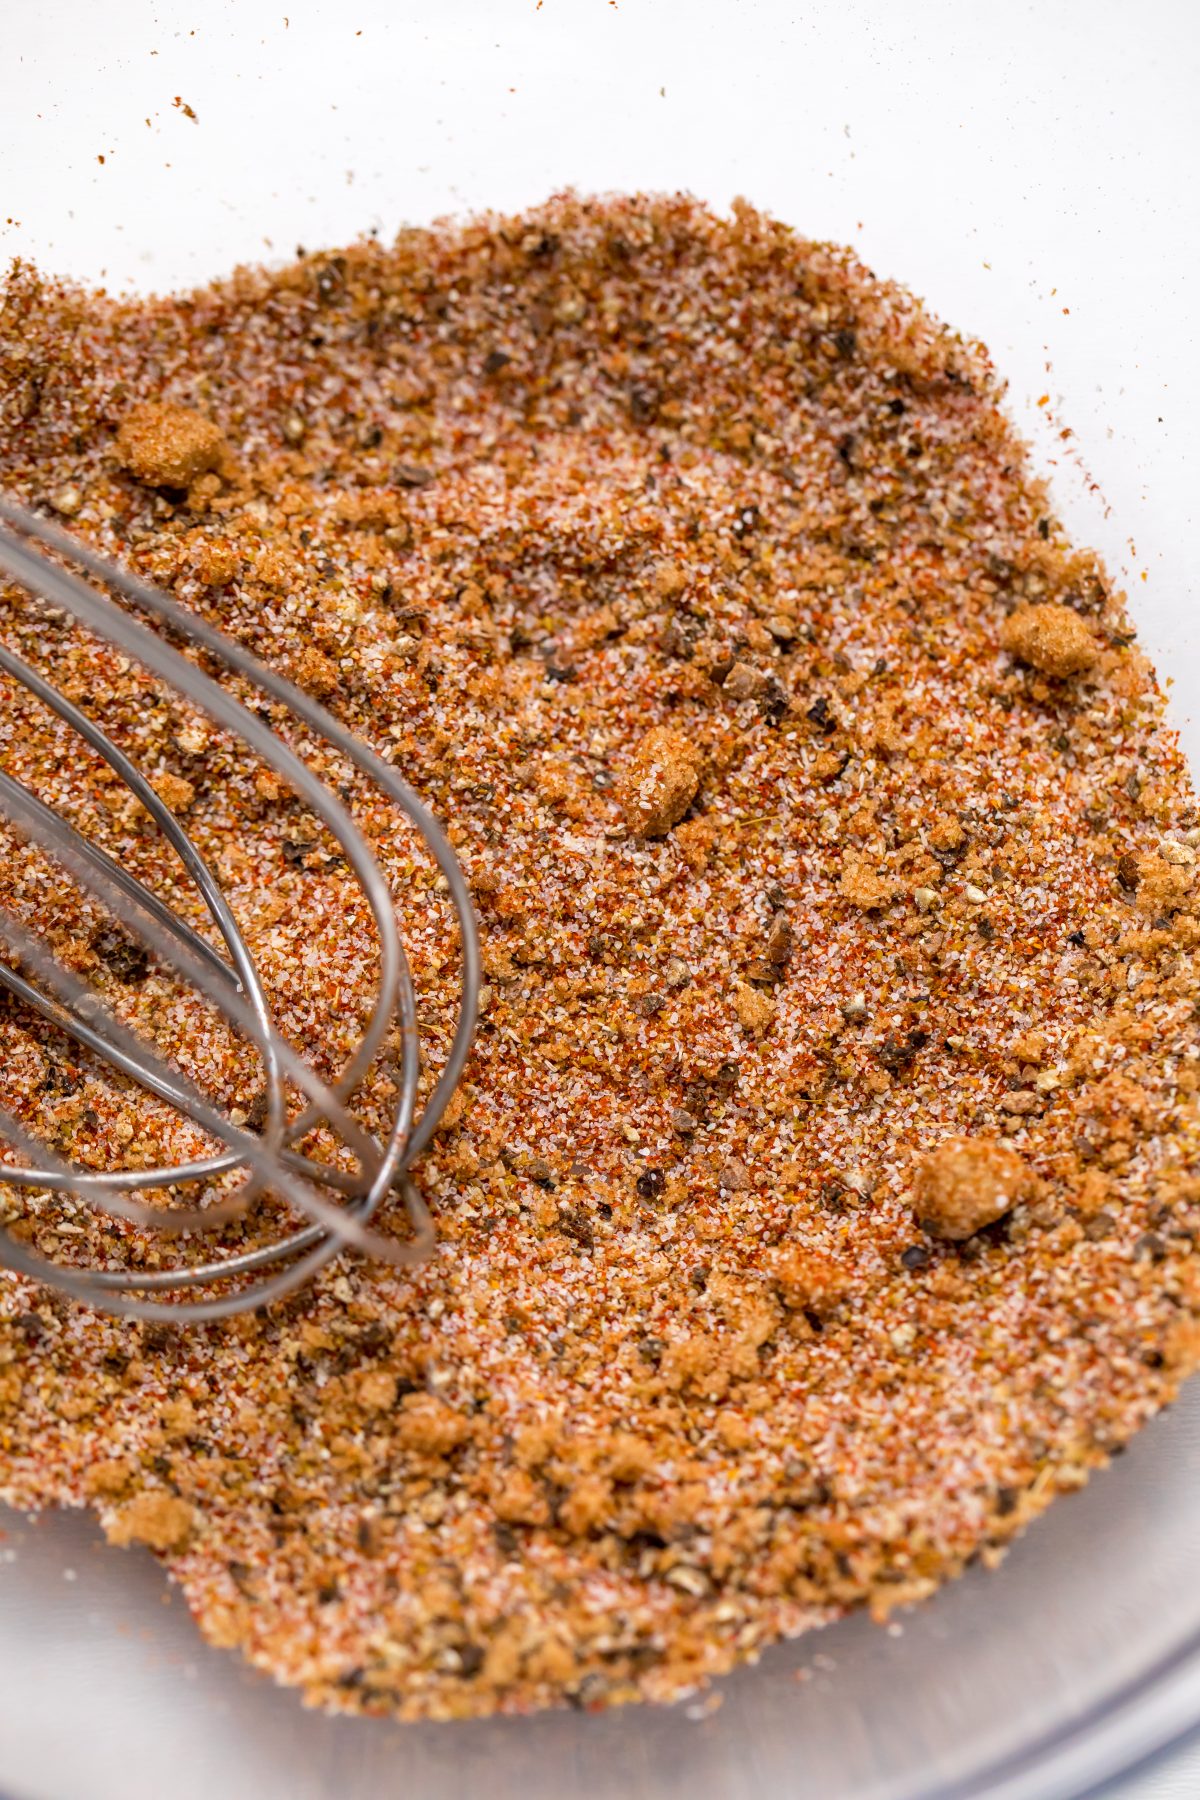 Make a mouthwatering spice rub